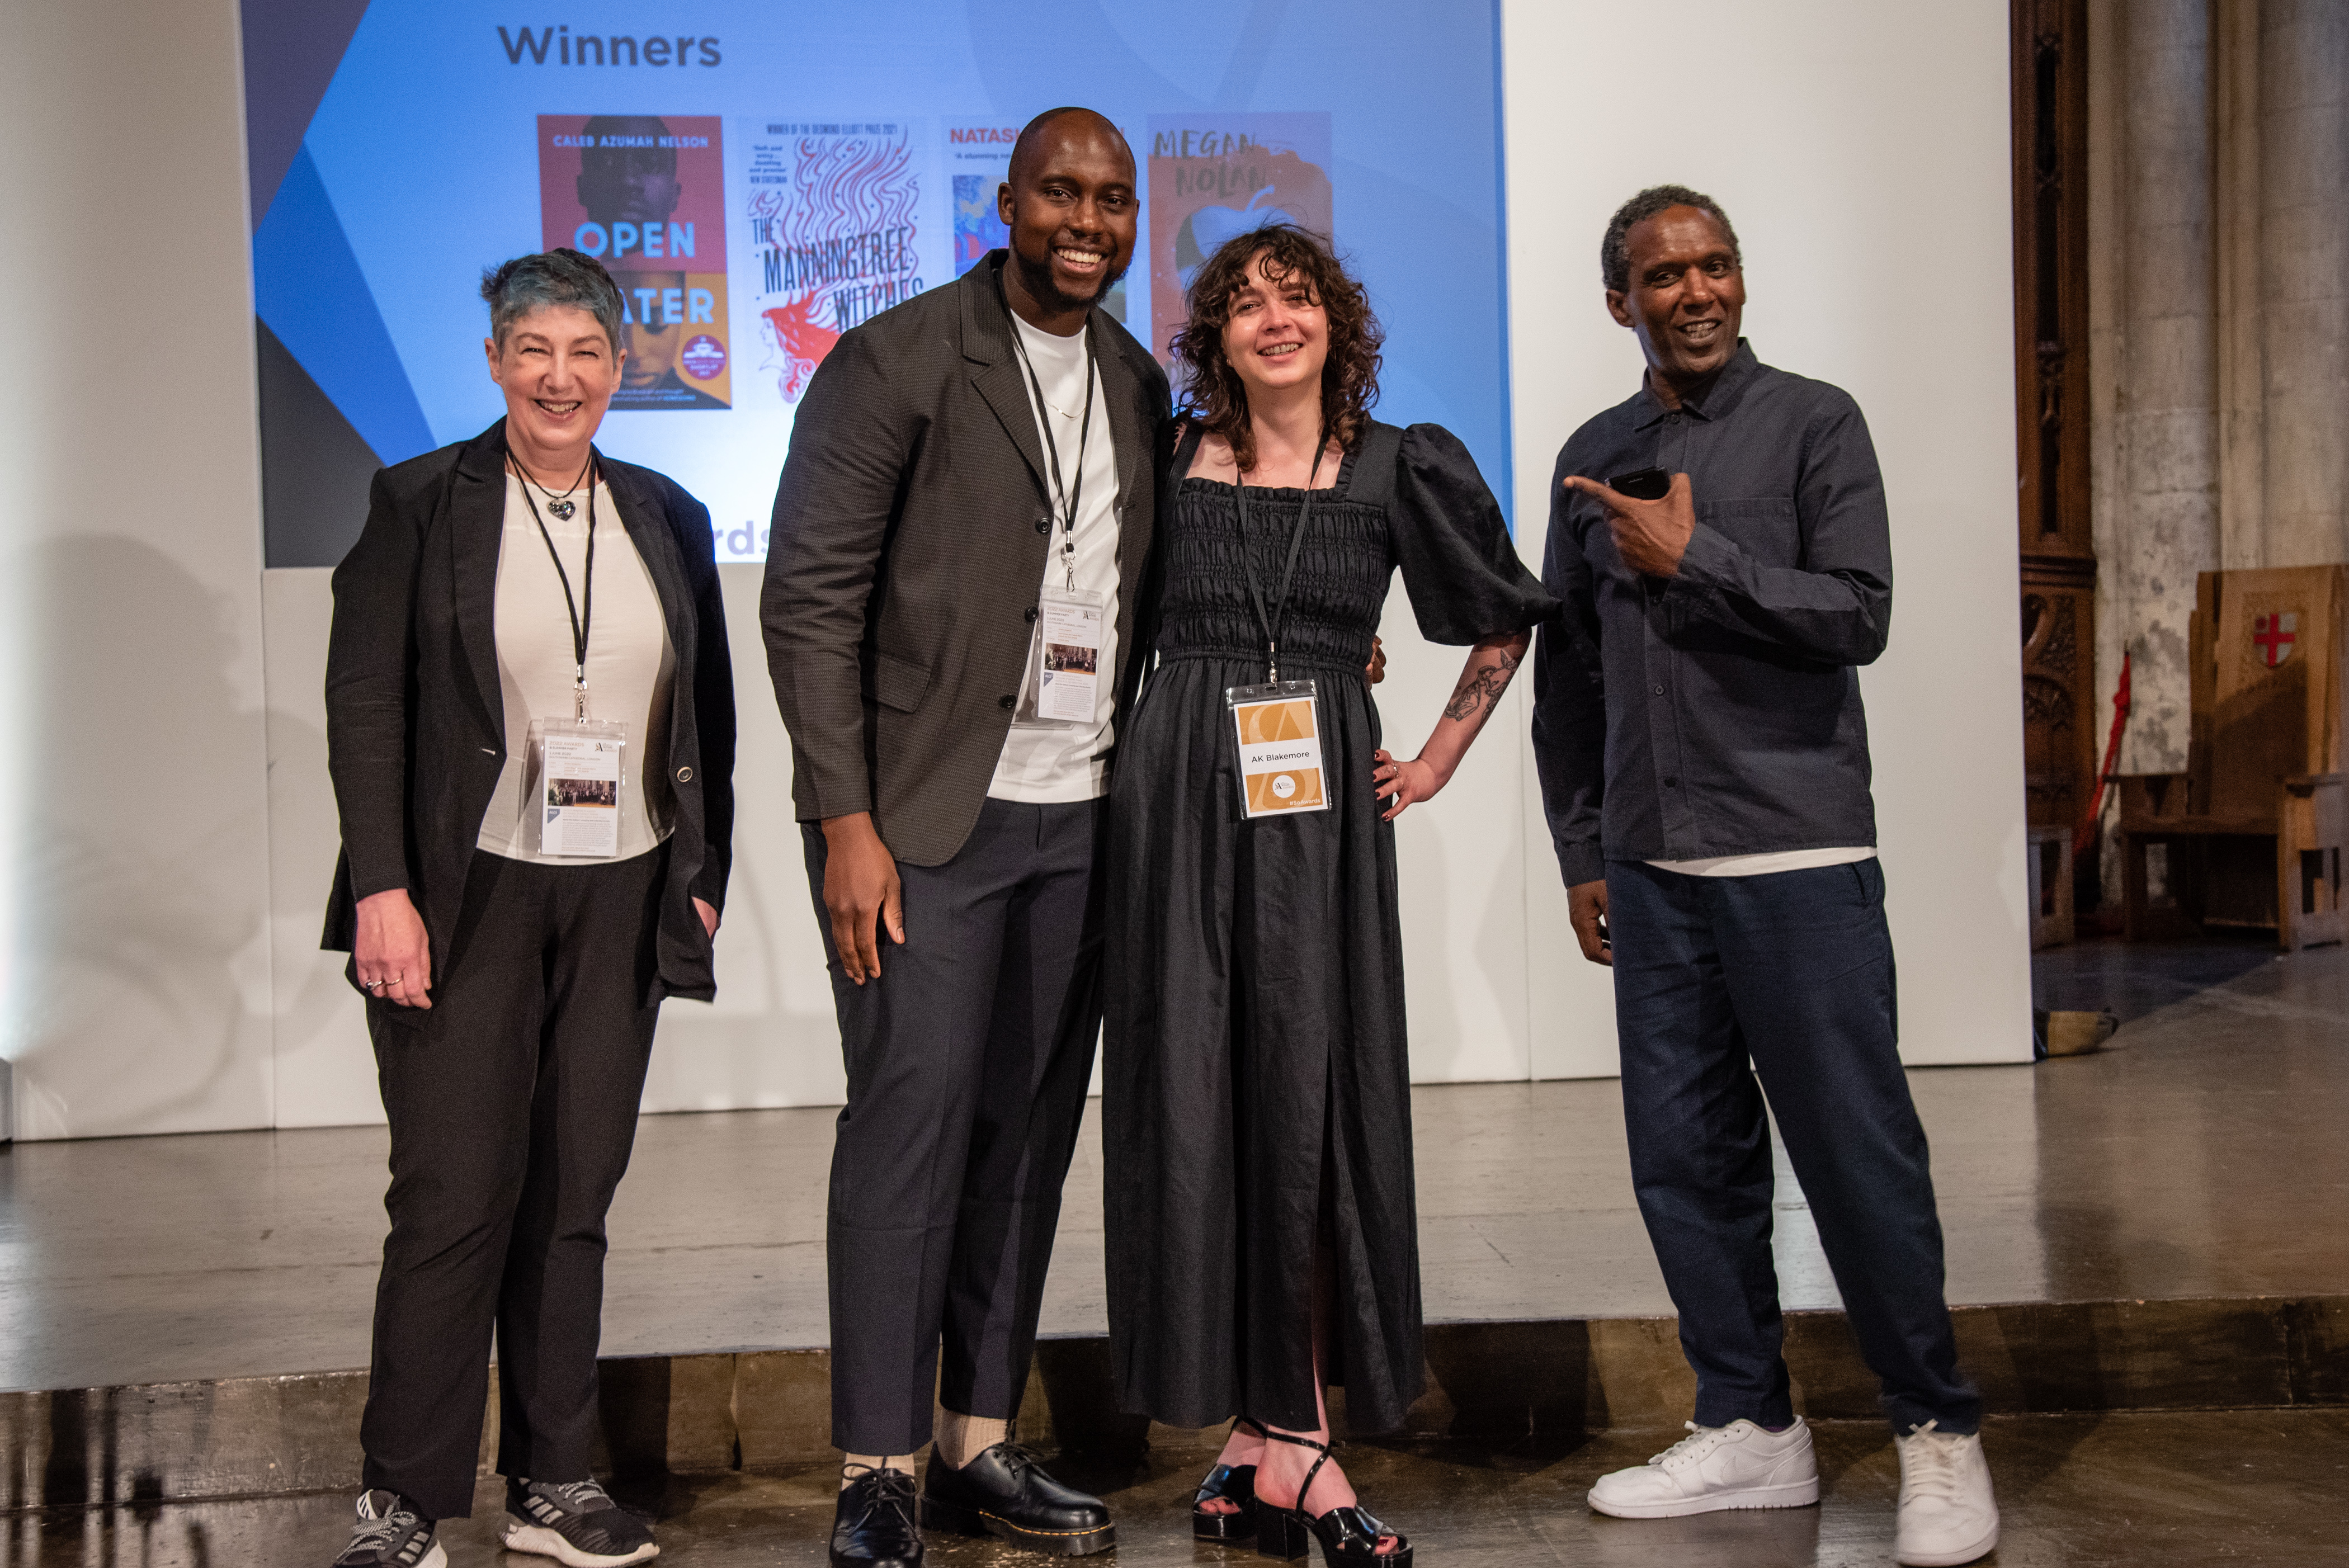 SoA 2023 Awards open, including new prize to encourage disability representation in literature